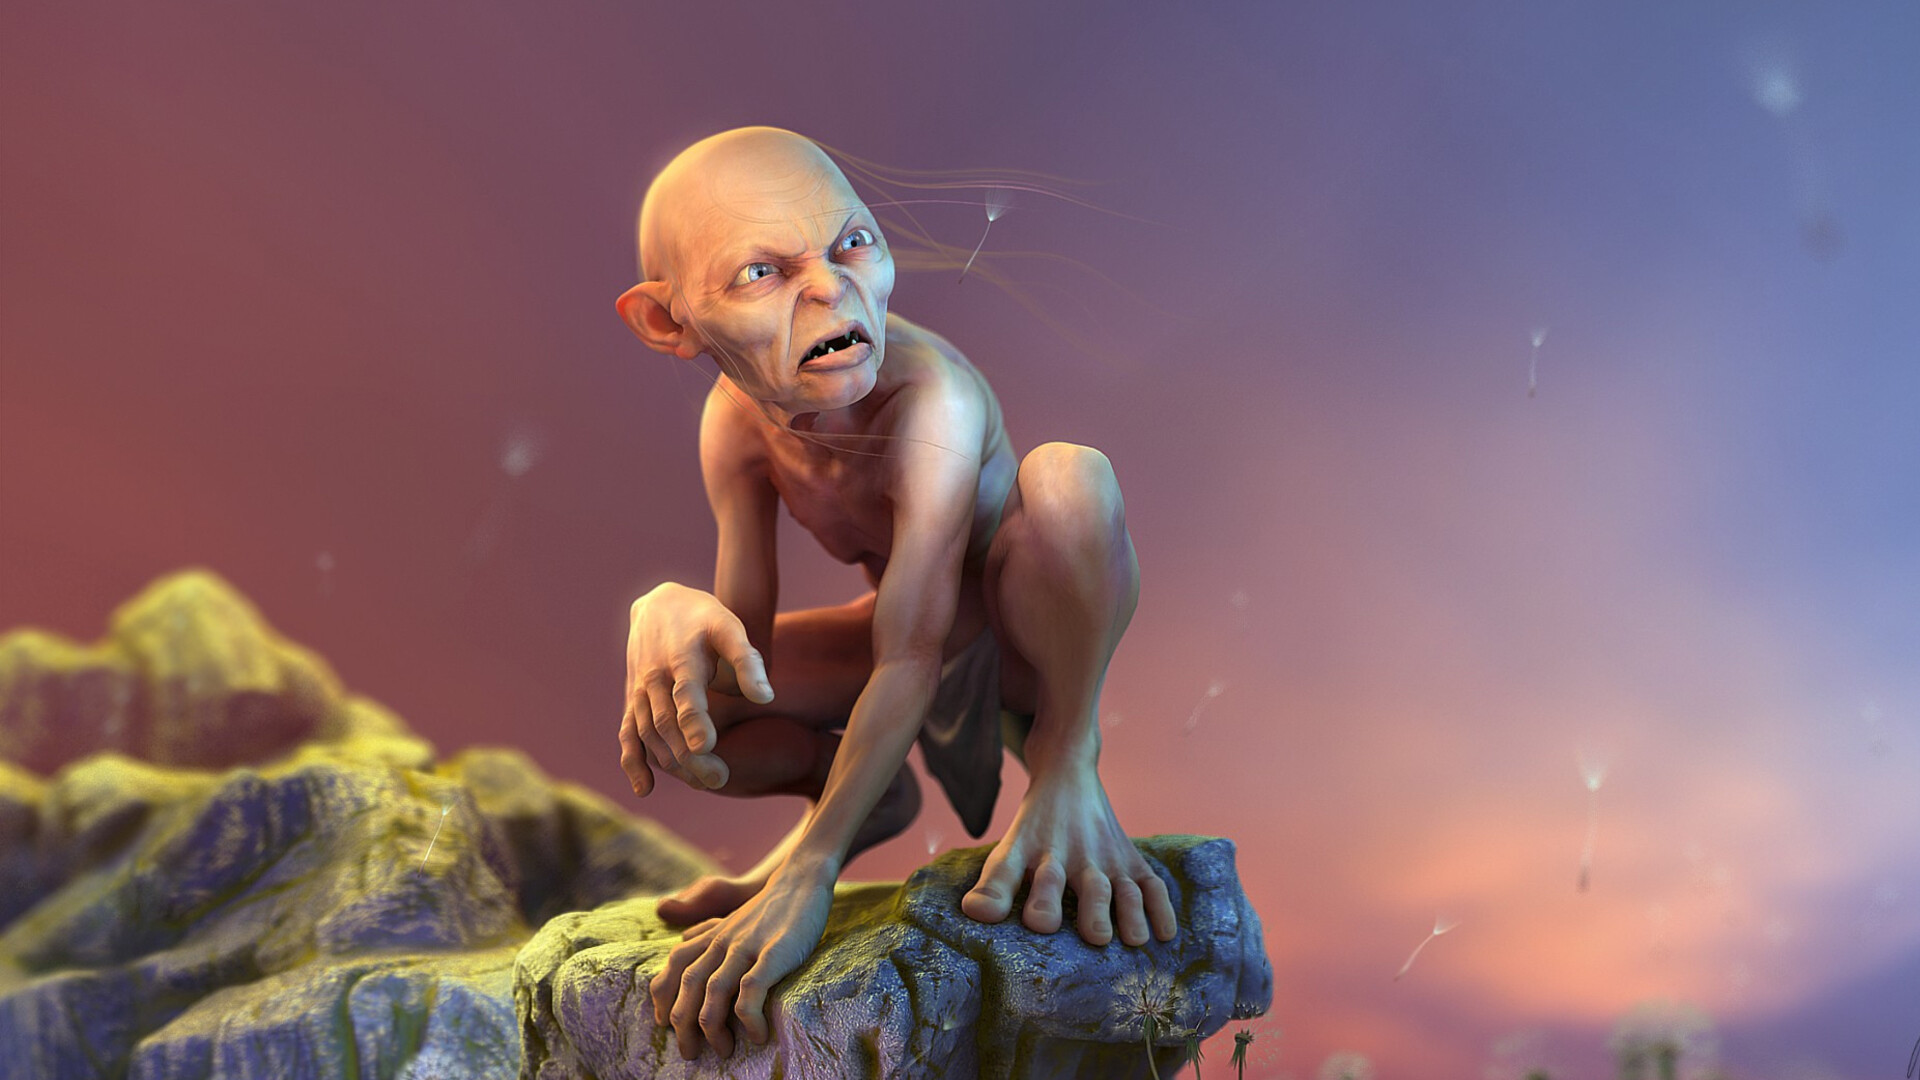 Gollum, Lord of the Rings, Detailed wallpaper, Fierce expression, 1920x1080 Full HD Desktop